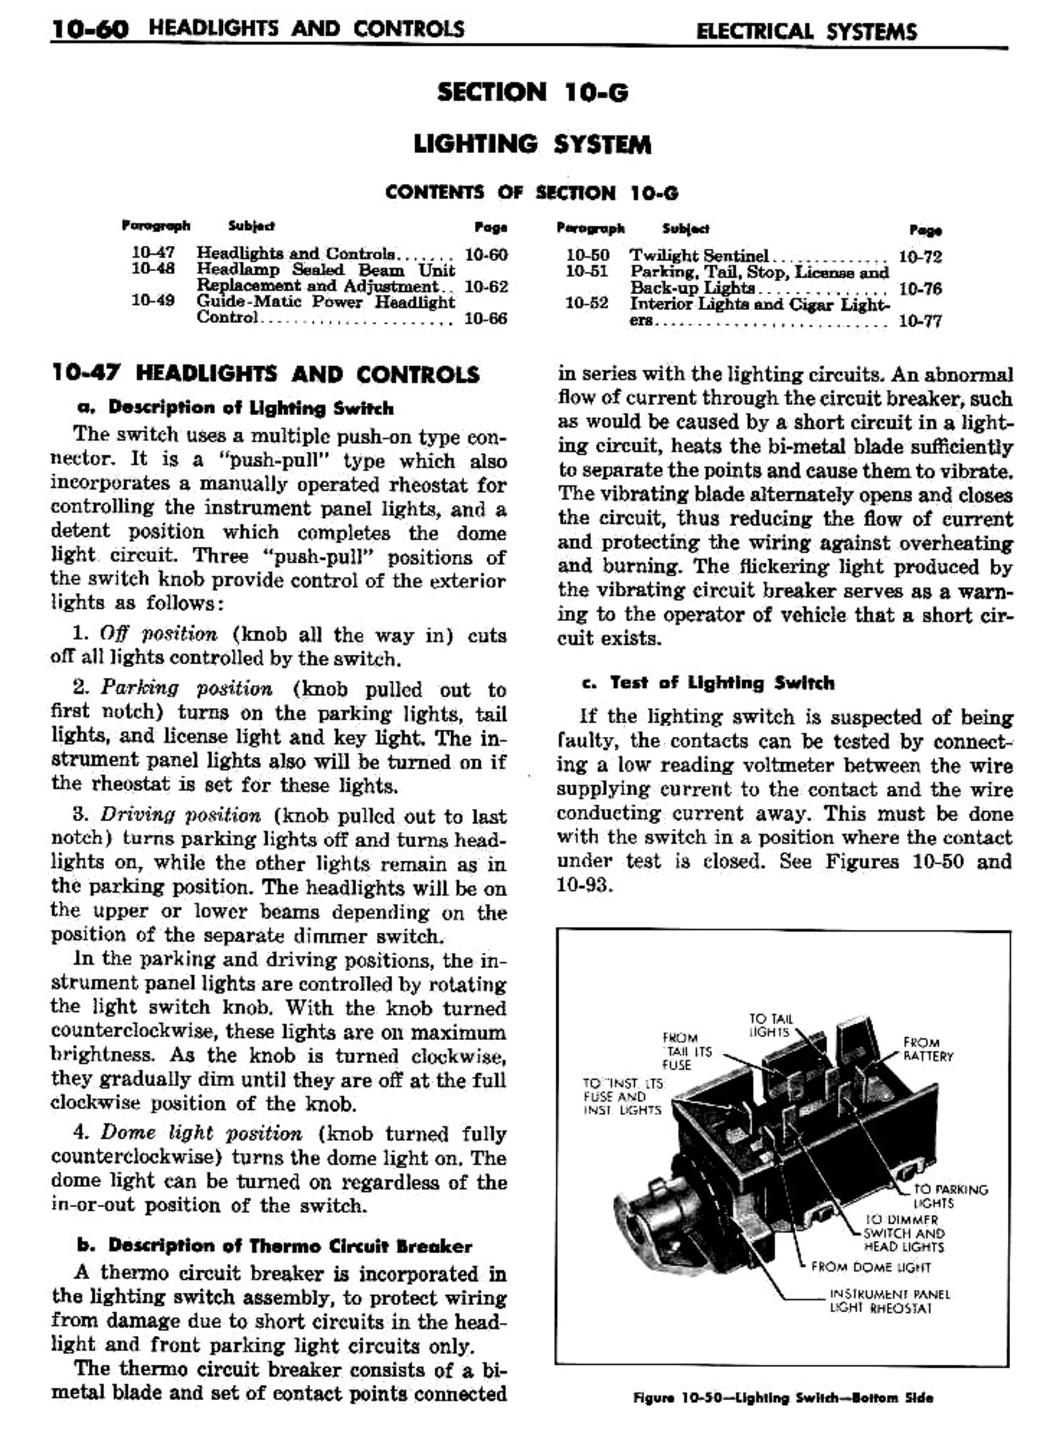 n_11 1960 Buick Shop Manual - Electrical Systems-060-060.jpg